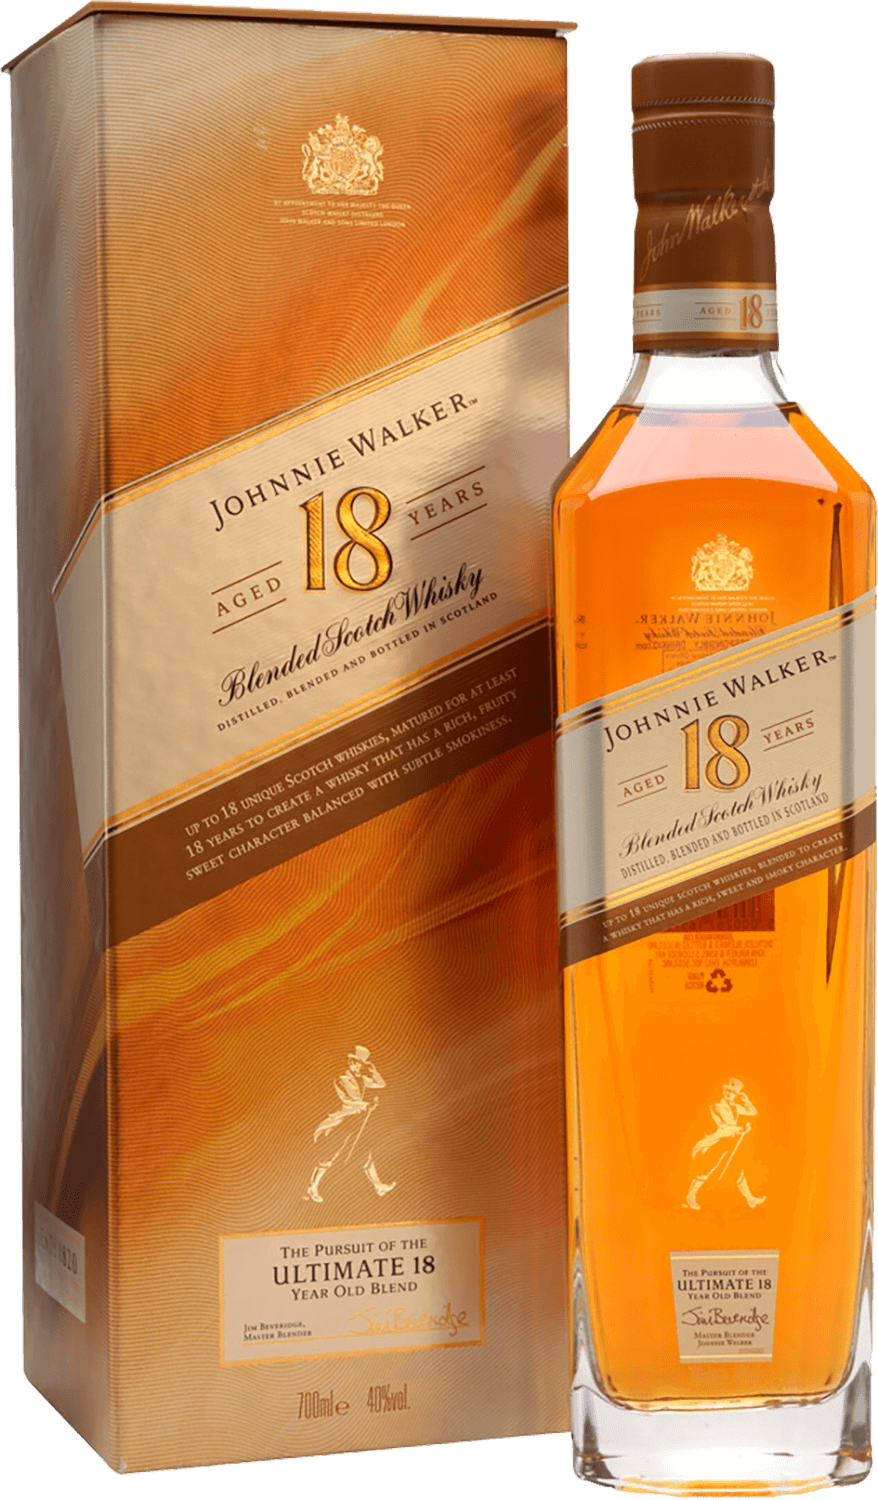 Johnnie Walker 18 y.o. Blended Scotch Whisky (gift box) johnnie walker blue label blended scotch whisky gift box